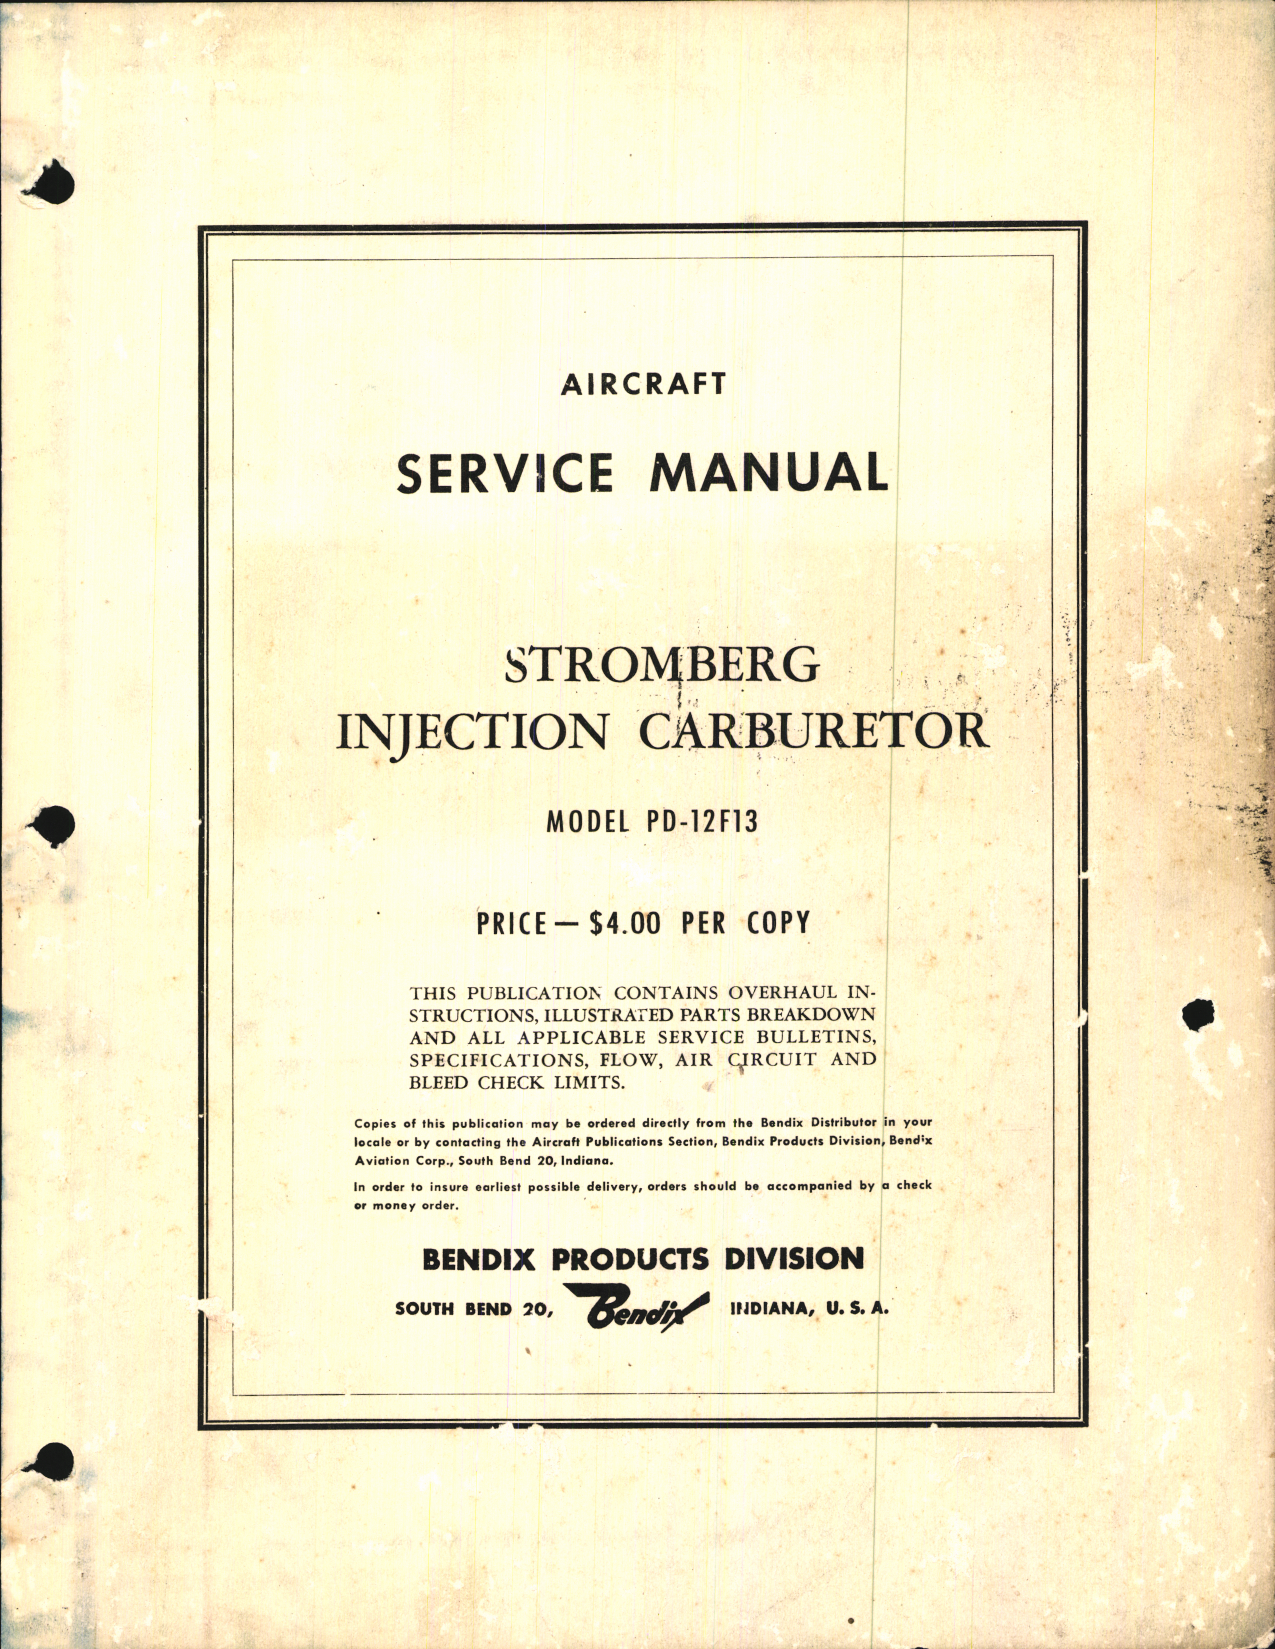 Sample page 1 from AirCorps Library document: Service Manual for Stromberg Injection Carburetor Model PD-12F13